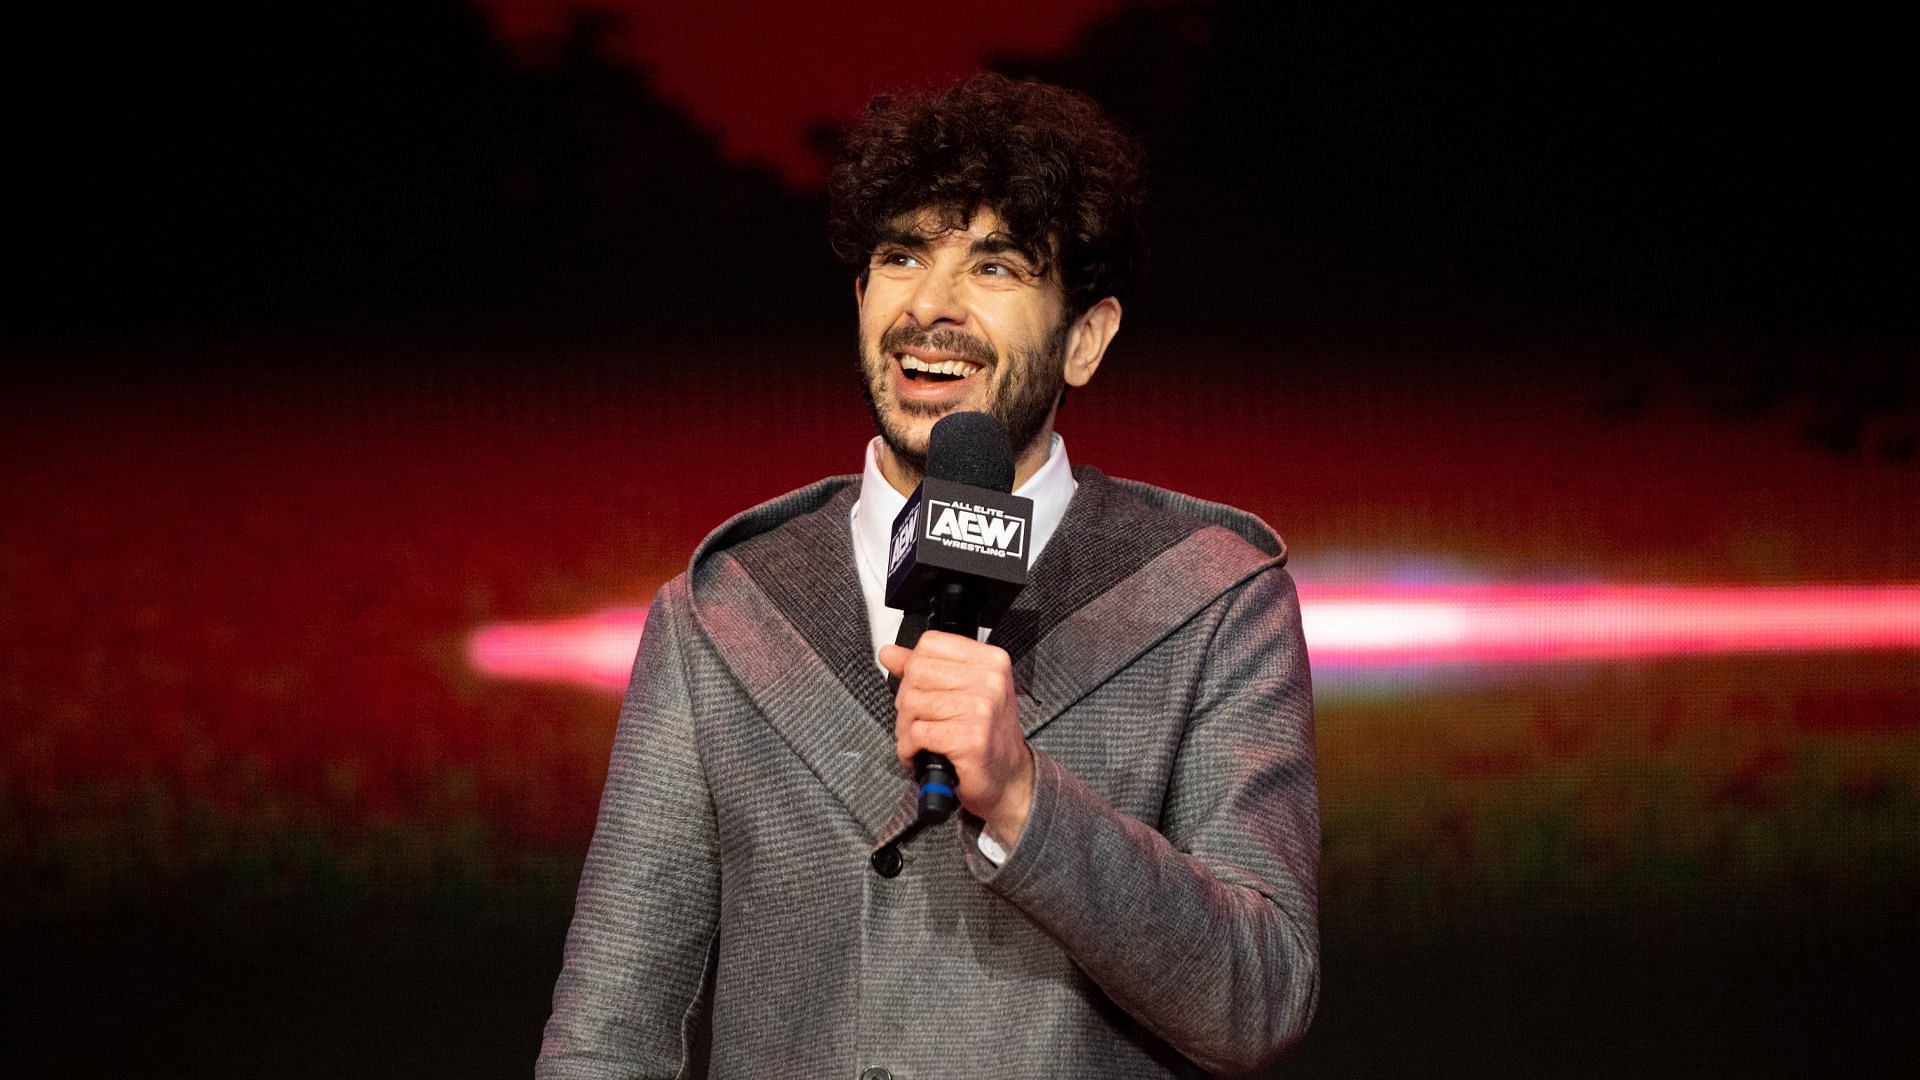 Tony Khan is gearing up for AEW All In